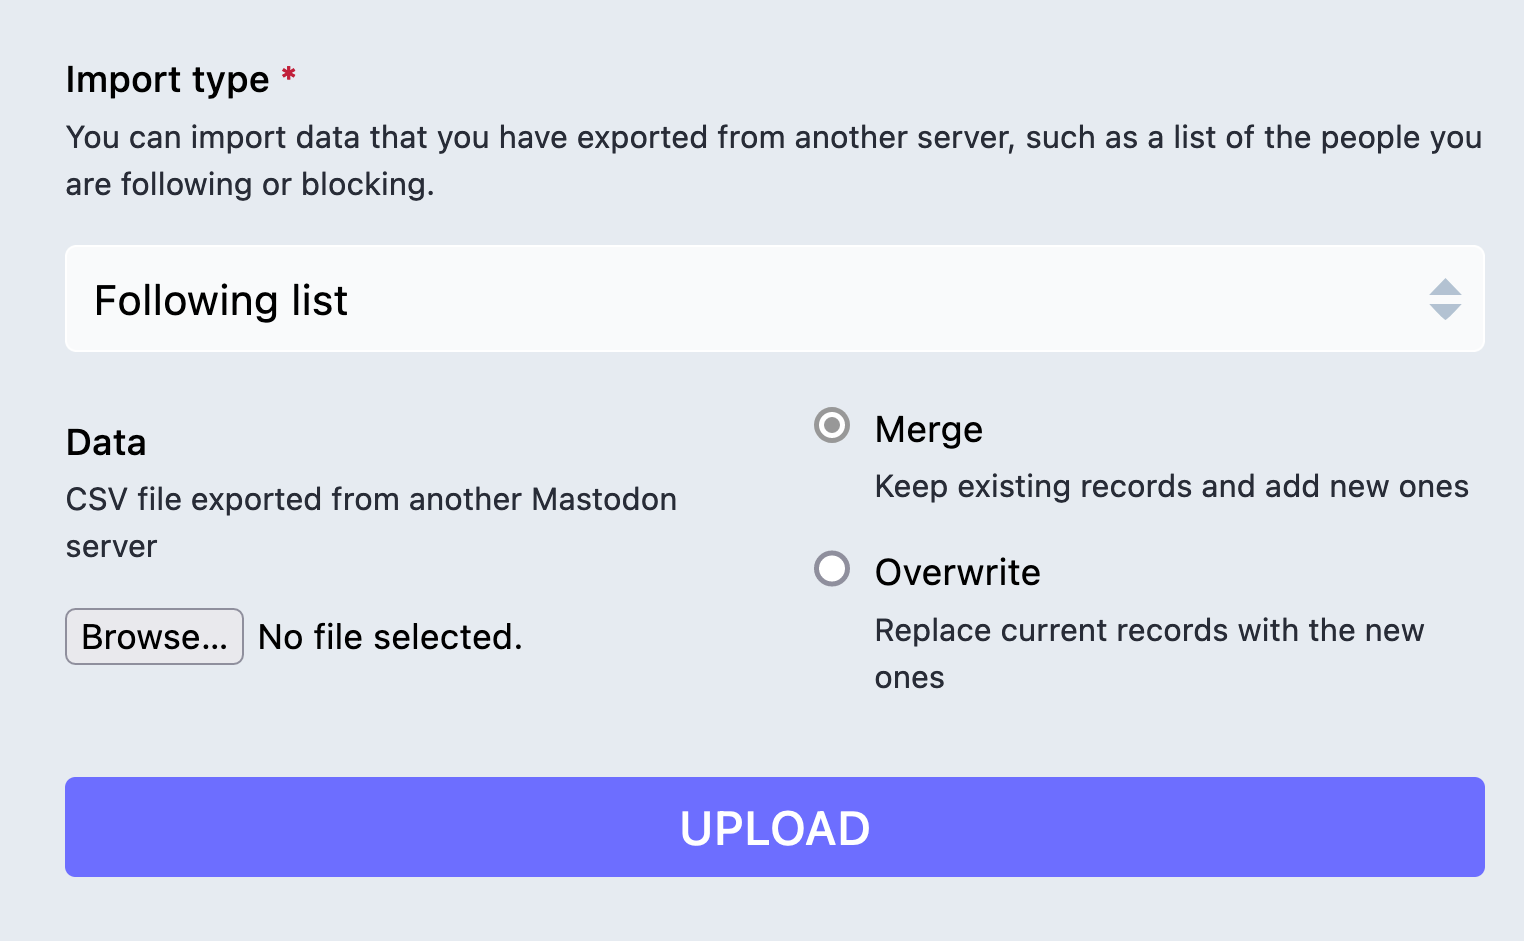 Mastodon web UI for importing data. The title of the section is, 'Import type'. The instructions read, 'You can import data that you have exported from another server, such as a list of the people you are following or blocking.' Following that is a select menu in a collapsed state, with a selected option that reads, 'Following list.' After the select is two columns. The left column is a file upload prompt with a label that reads, 'Data', and instructions that reads, 'CSV file exported from another Mastodon server'. The right column has two radio options. The first radio option reads, 'Merge. Keep existing records and add new ones.' The second radio option reads, 'Overwrite. Replace current records with the new ones.' Following the two columns is a button labeled, 'Upload'. Cropped screenshot.